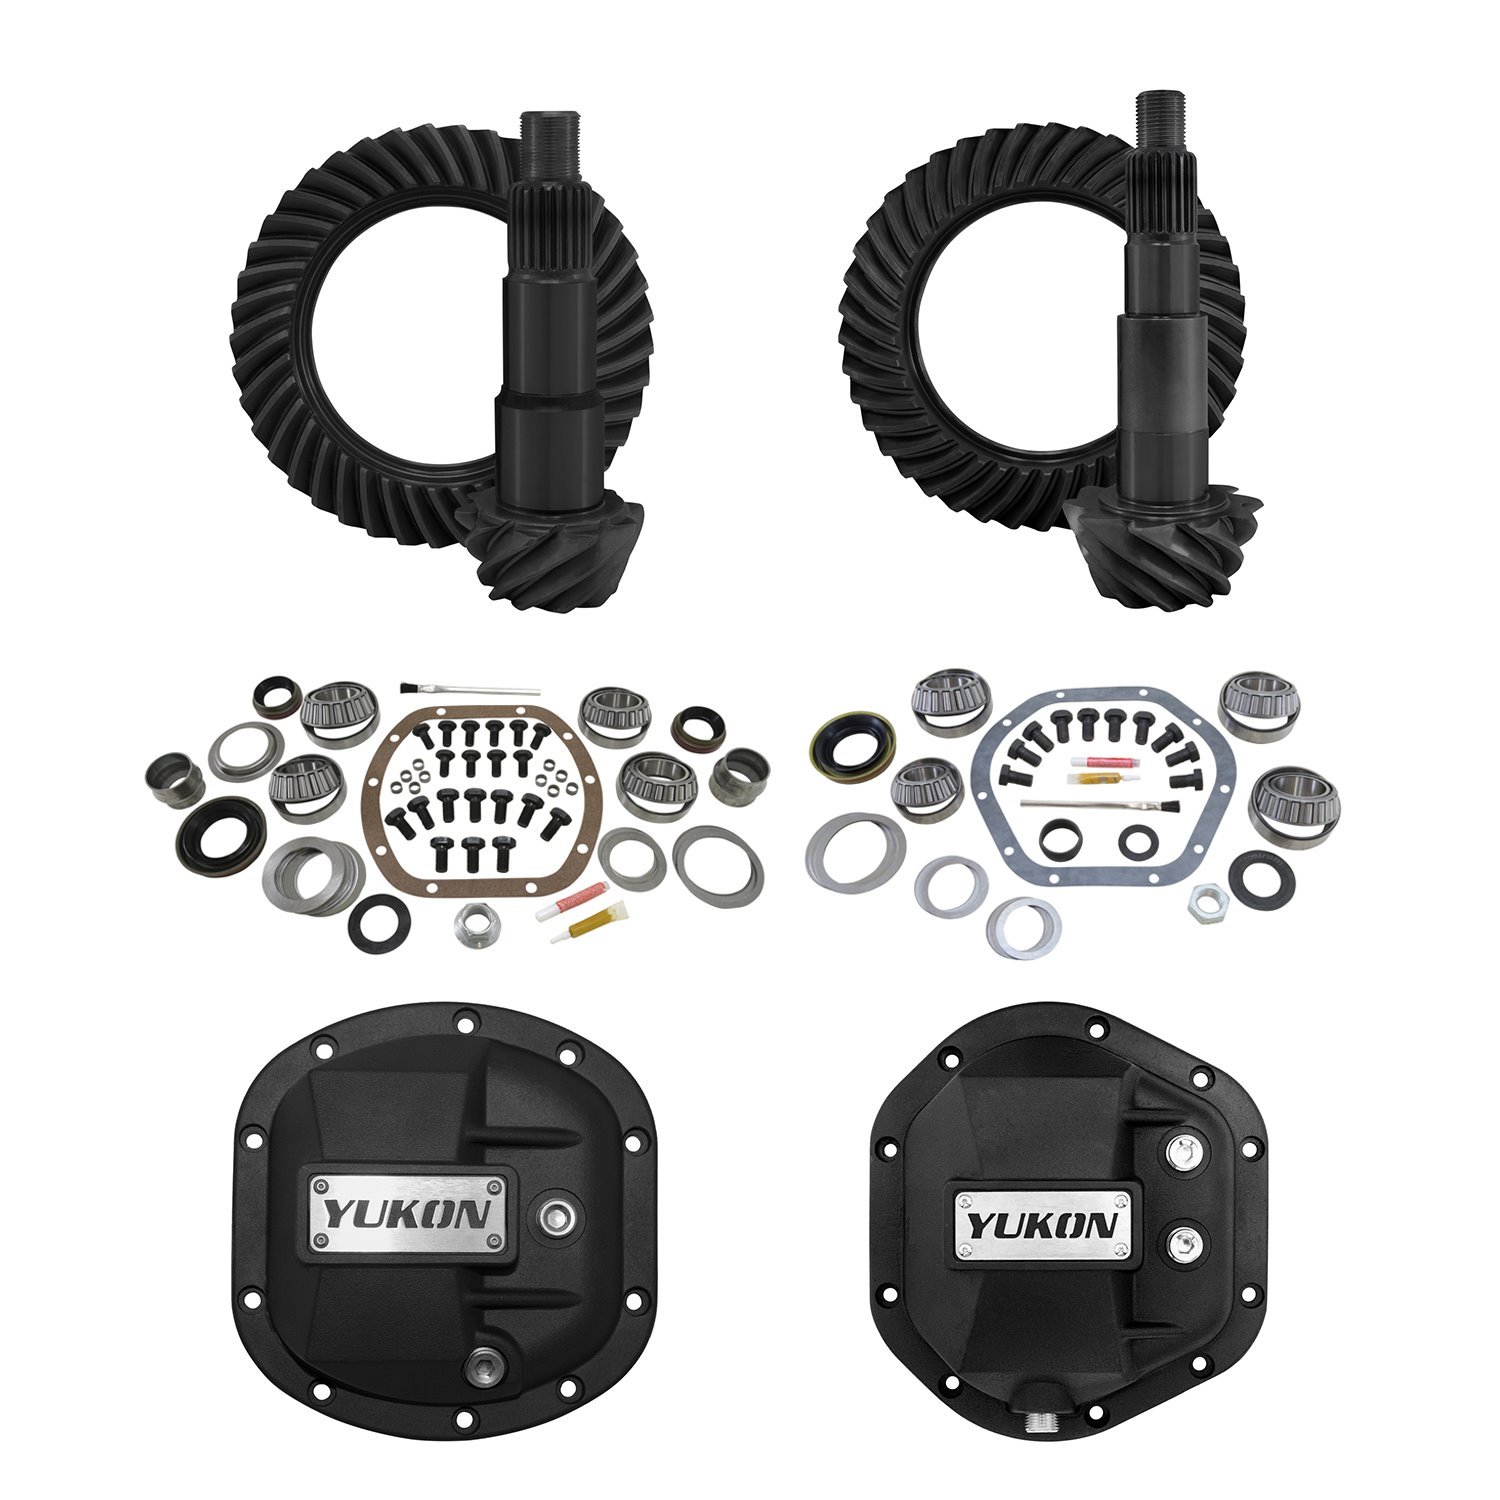 Stage 2 Jeep Jk Re-Gear Kit W/Covers For